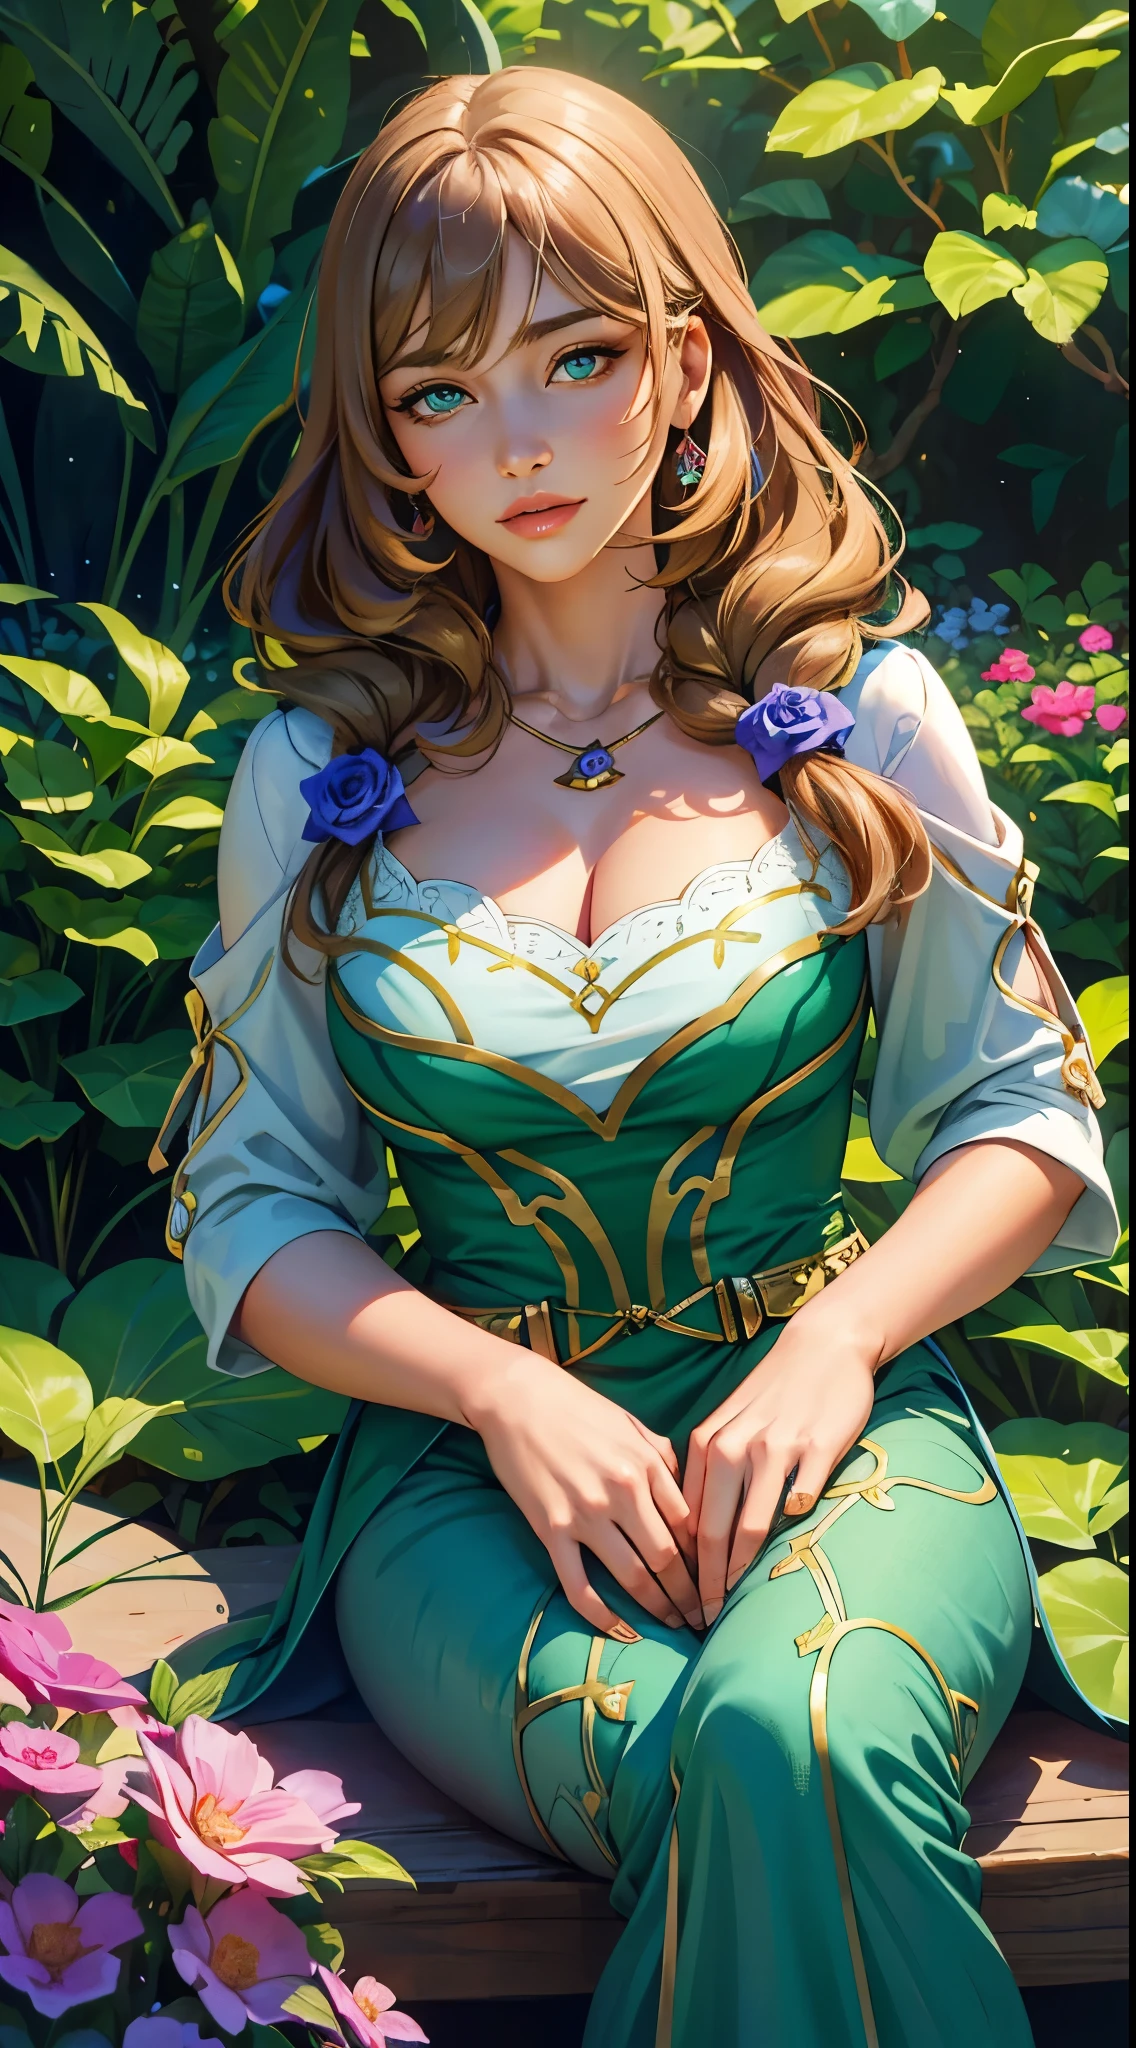 beautiful detailed eyes,detailed lips,girl in a garden,soft lighting, oil painting style,vibrant colors,peaceful expression, flowy dress, greenery surrounding, serene atmosphere, calm and relaxed facial expression